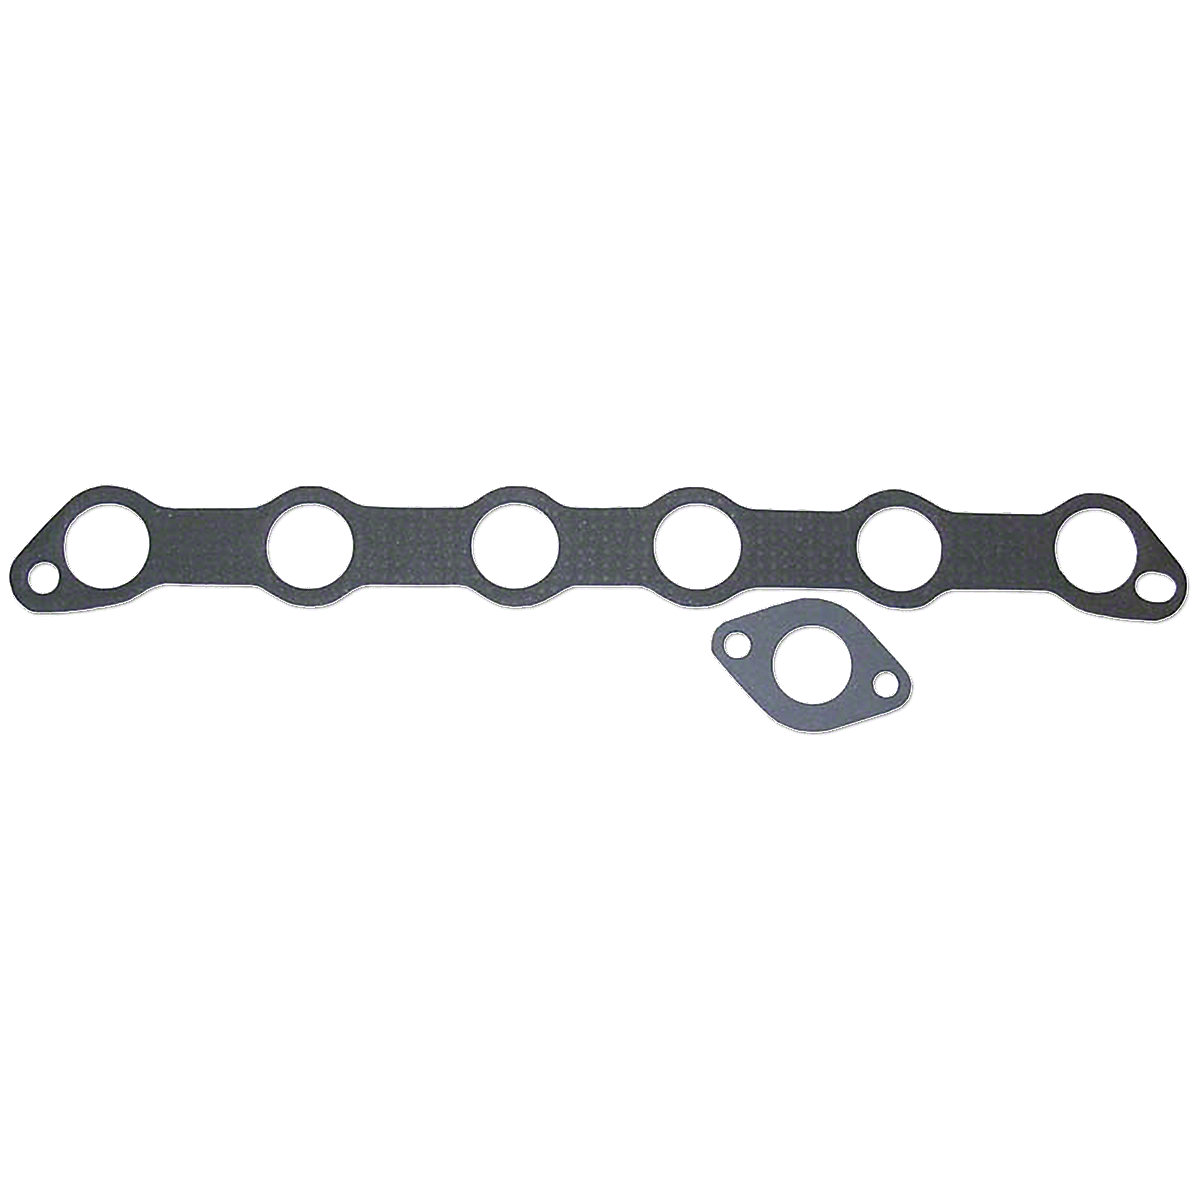 Intake And Exhaust Manifold Gasket Set For Allis Chalmers B, IB, C, CA, RC